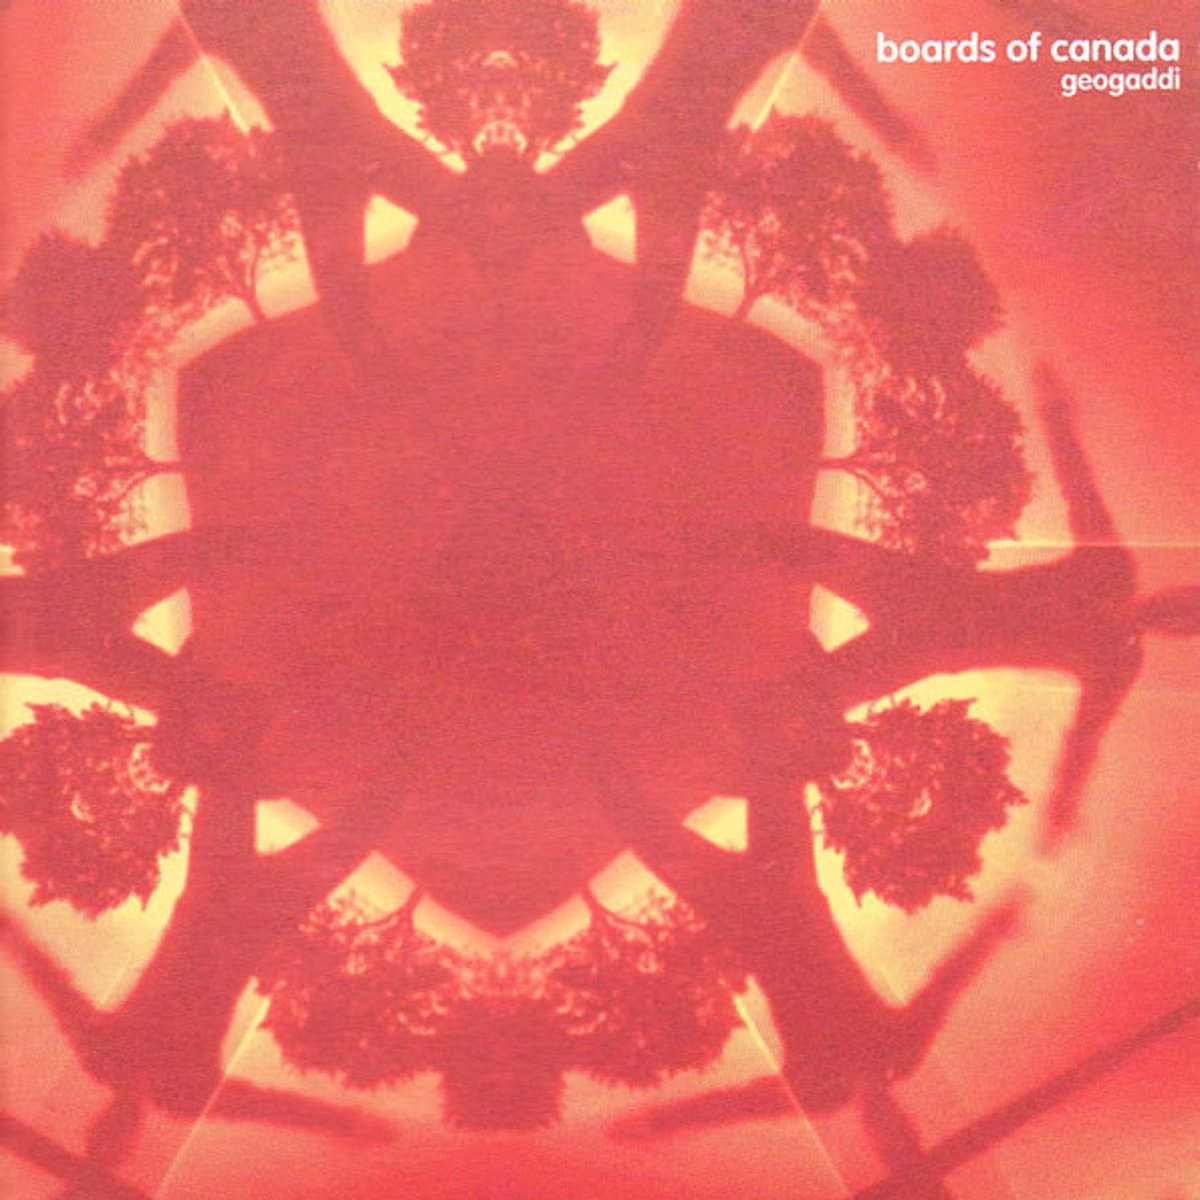 2002AOTY: Wilco - Yankee Hotel Foxtrot#2: Agalloch - The Mantle#3: Polaris - Home#4: Boards of Canada - GeogaddiTotal: 30